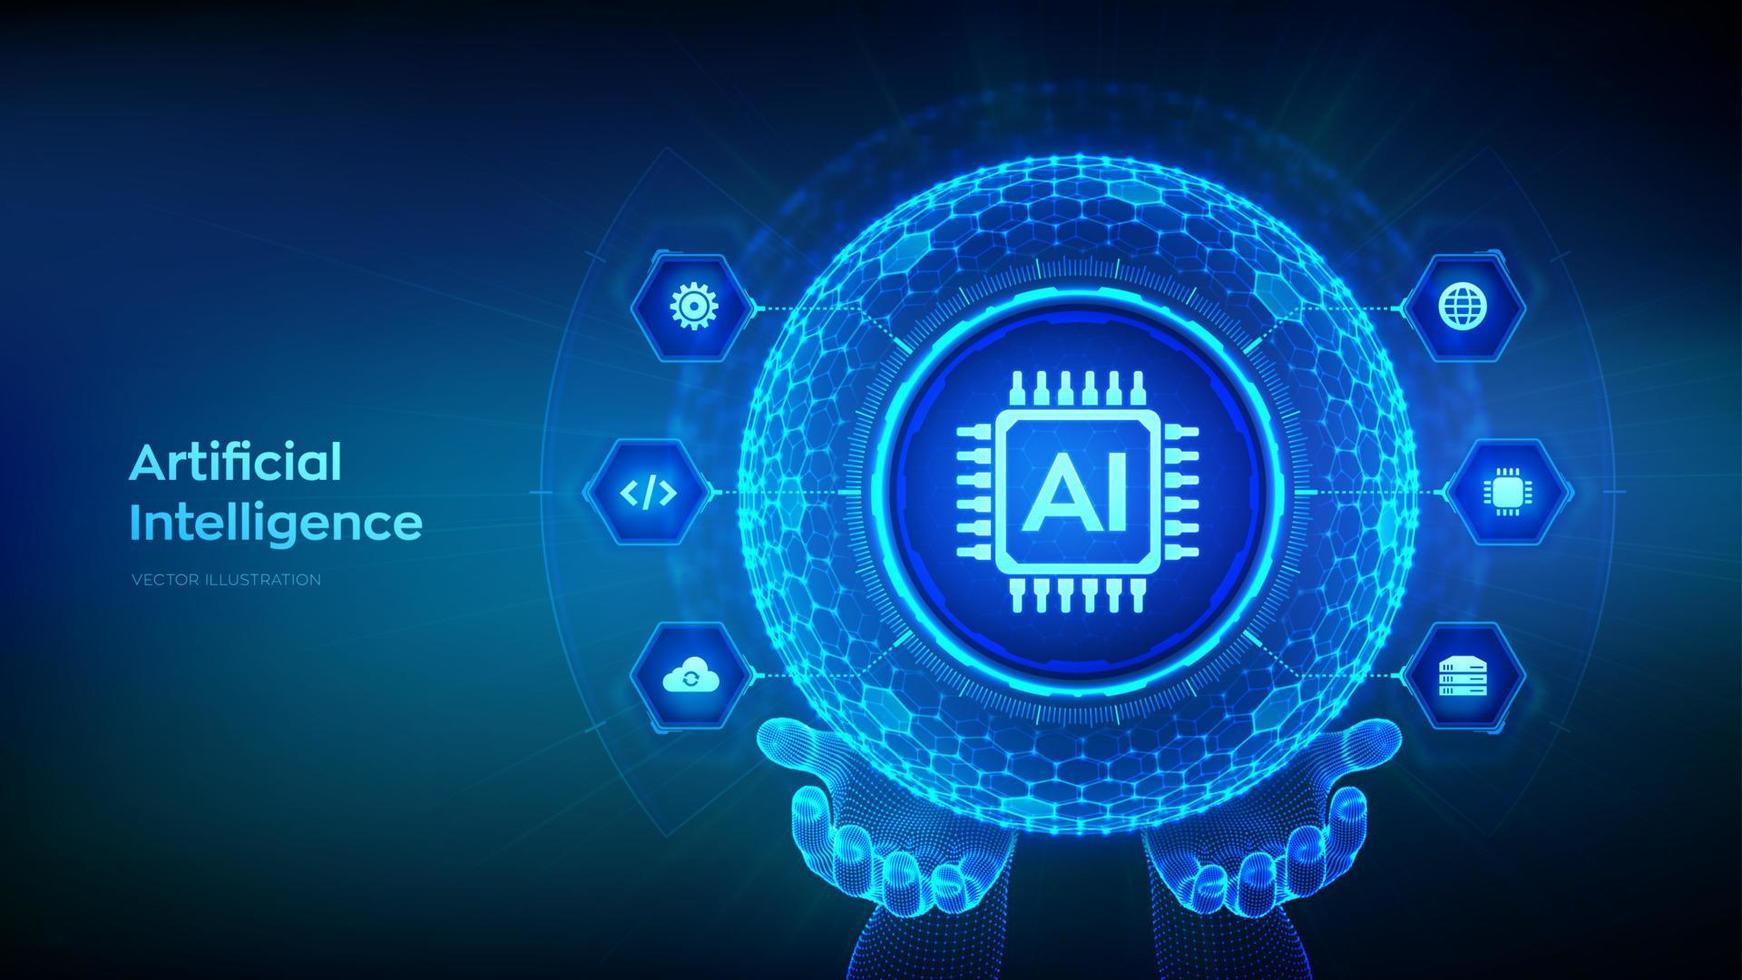 AI. Artificial Intelligence in the shape of sphere with hexagon grid pattern in wireframe hands. Machine Learning Concept. Big data. Neural networks. AI and virtual technology. Vector illustration.